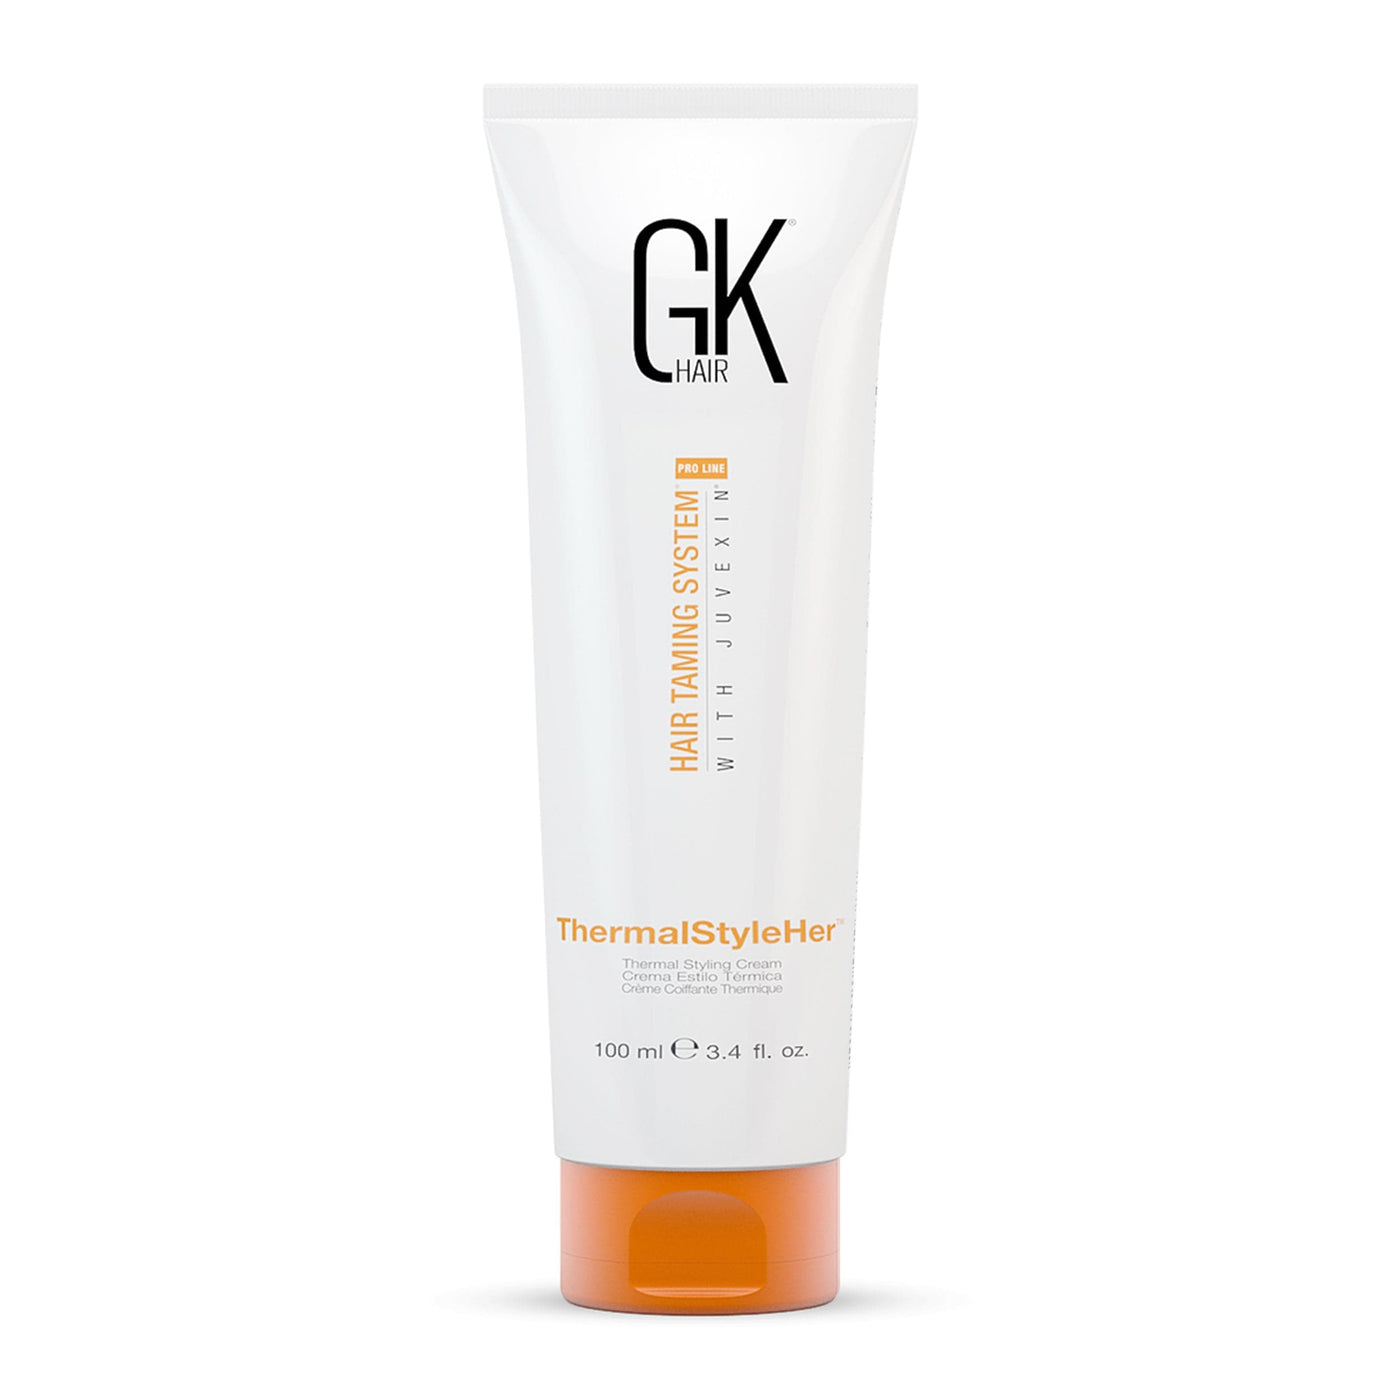 ThermalStyleHer Cream from GK Hair | Heat Protectant Cream